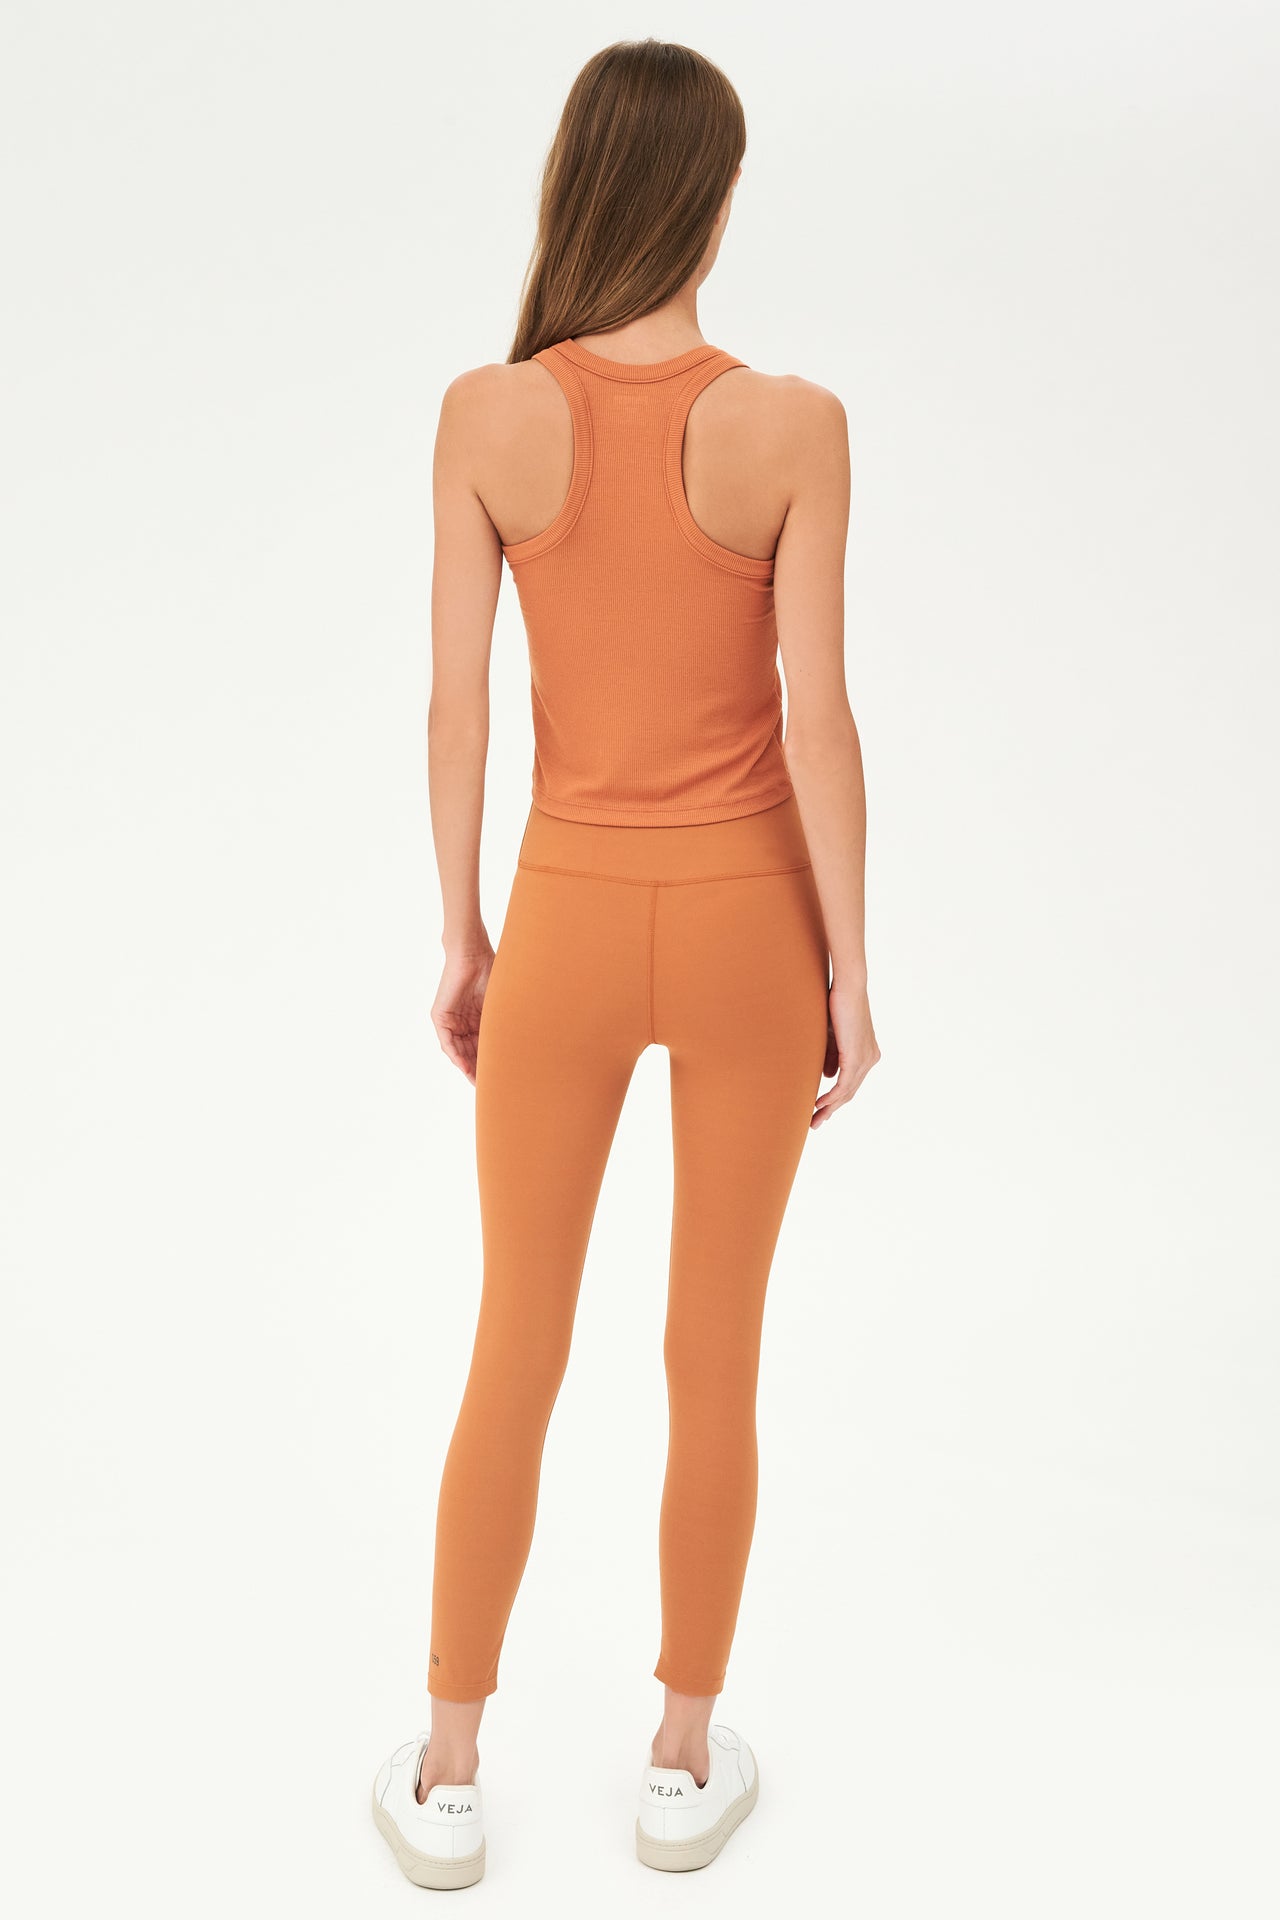 Full back view of girl wearing a ribbed orange cropped tank top and orange leggings with white shoes